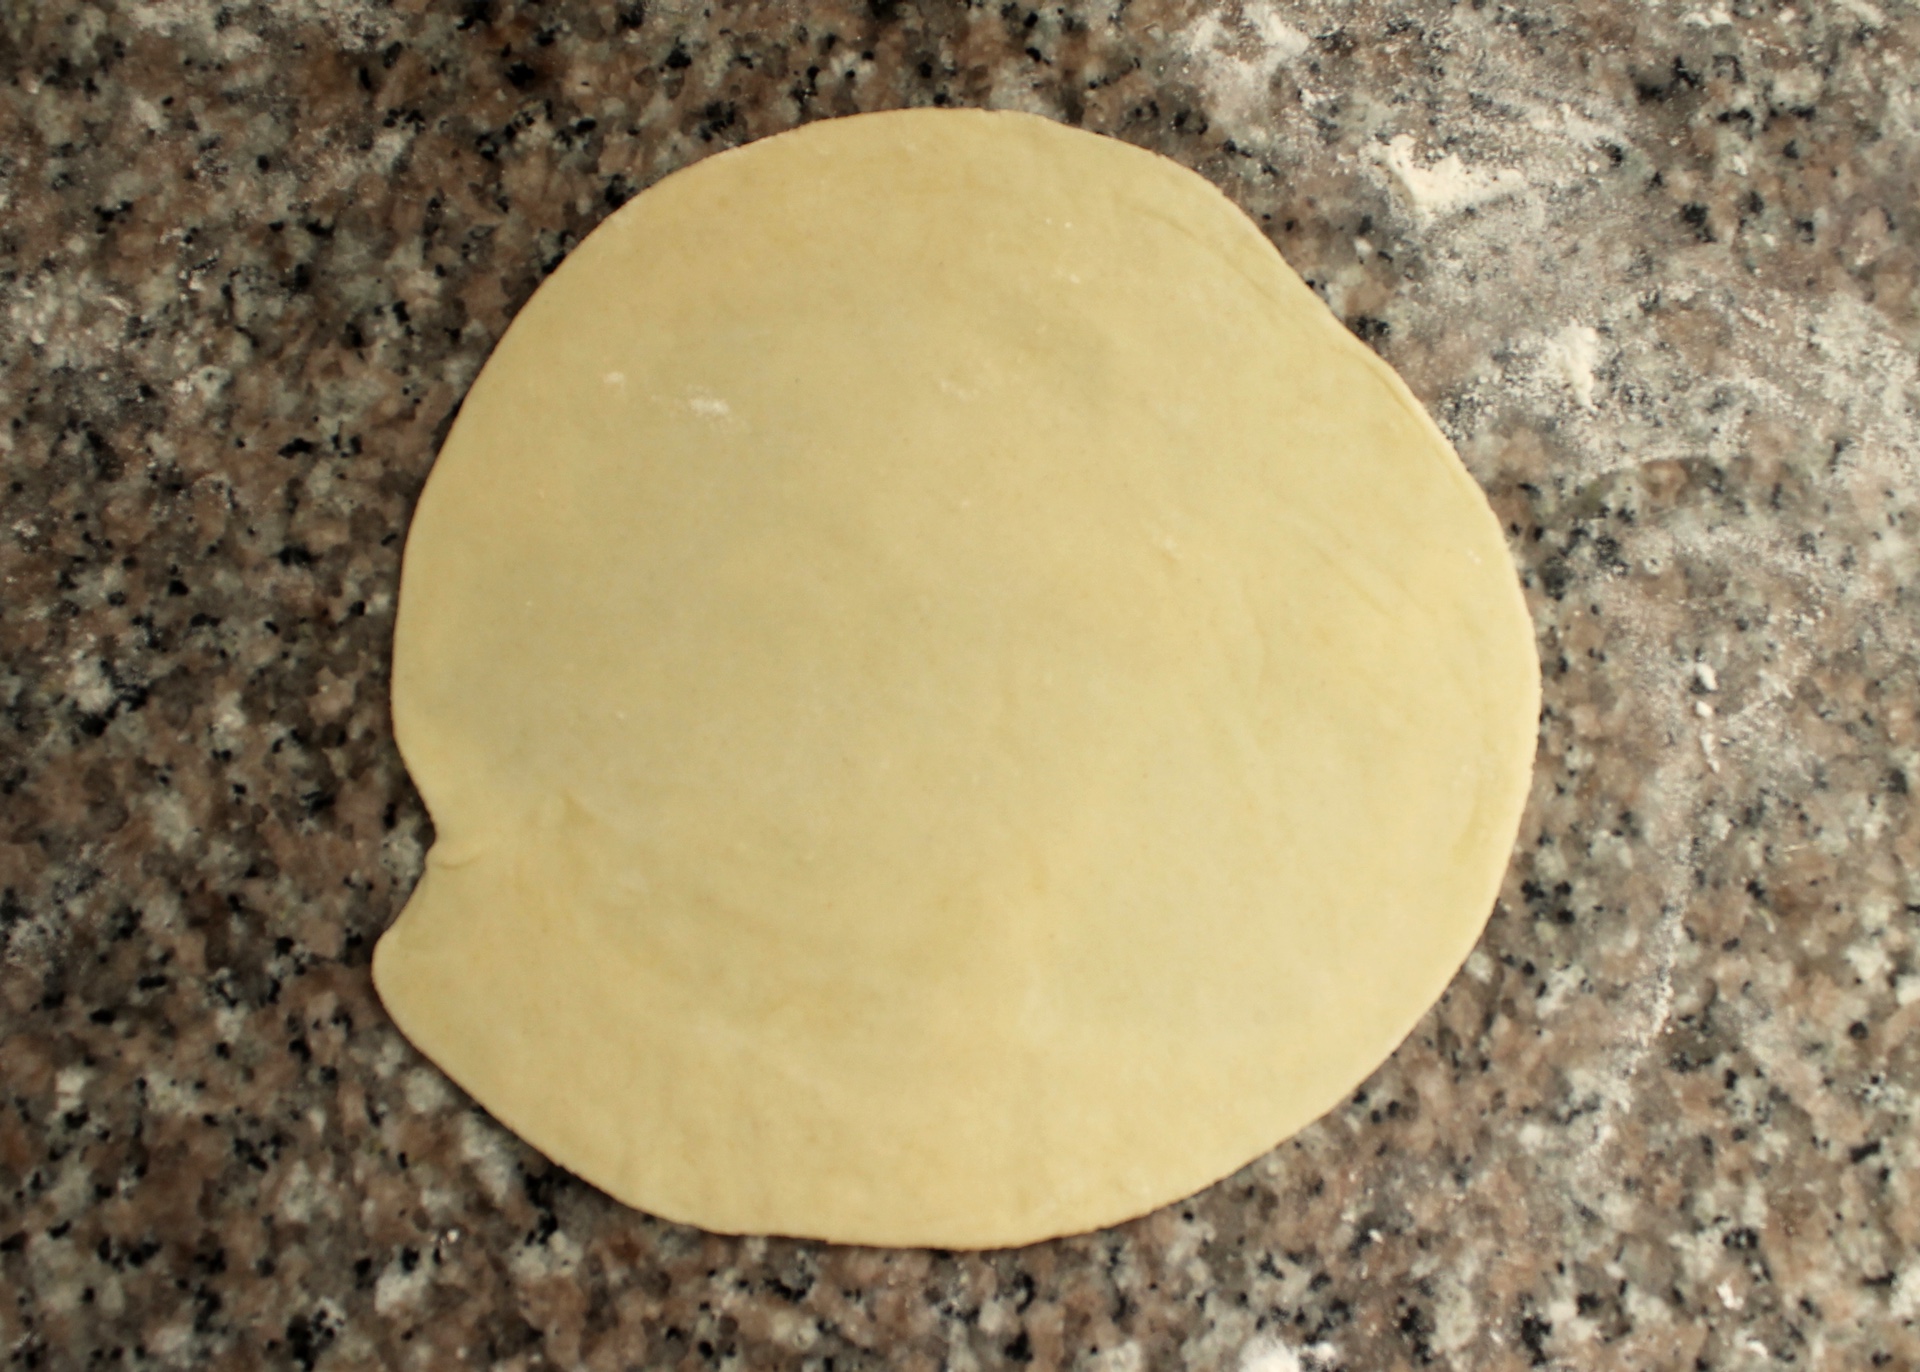 Perfectly round tortillas aren’t necessary.